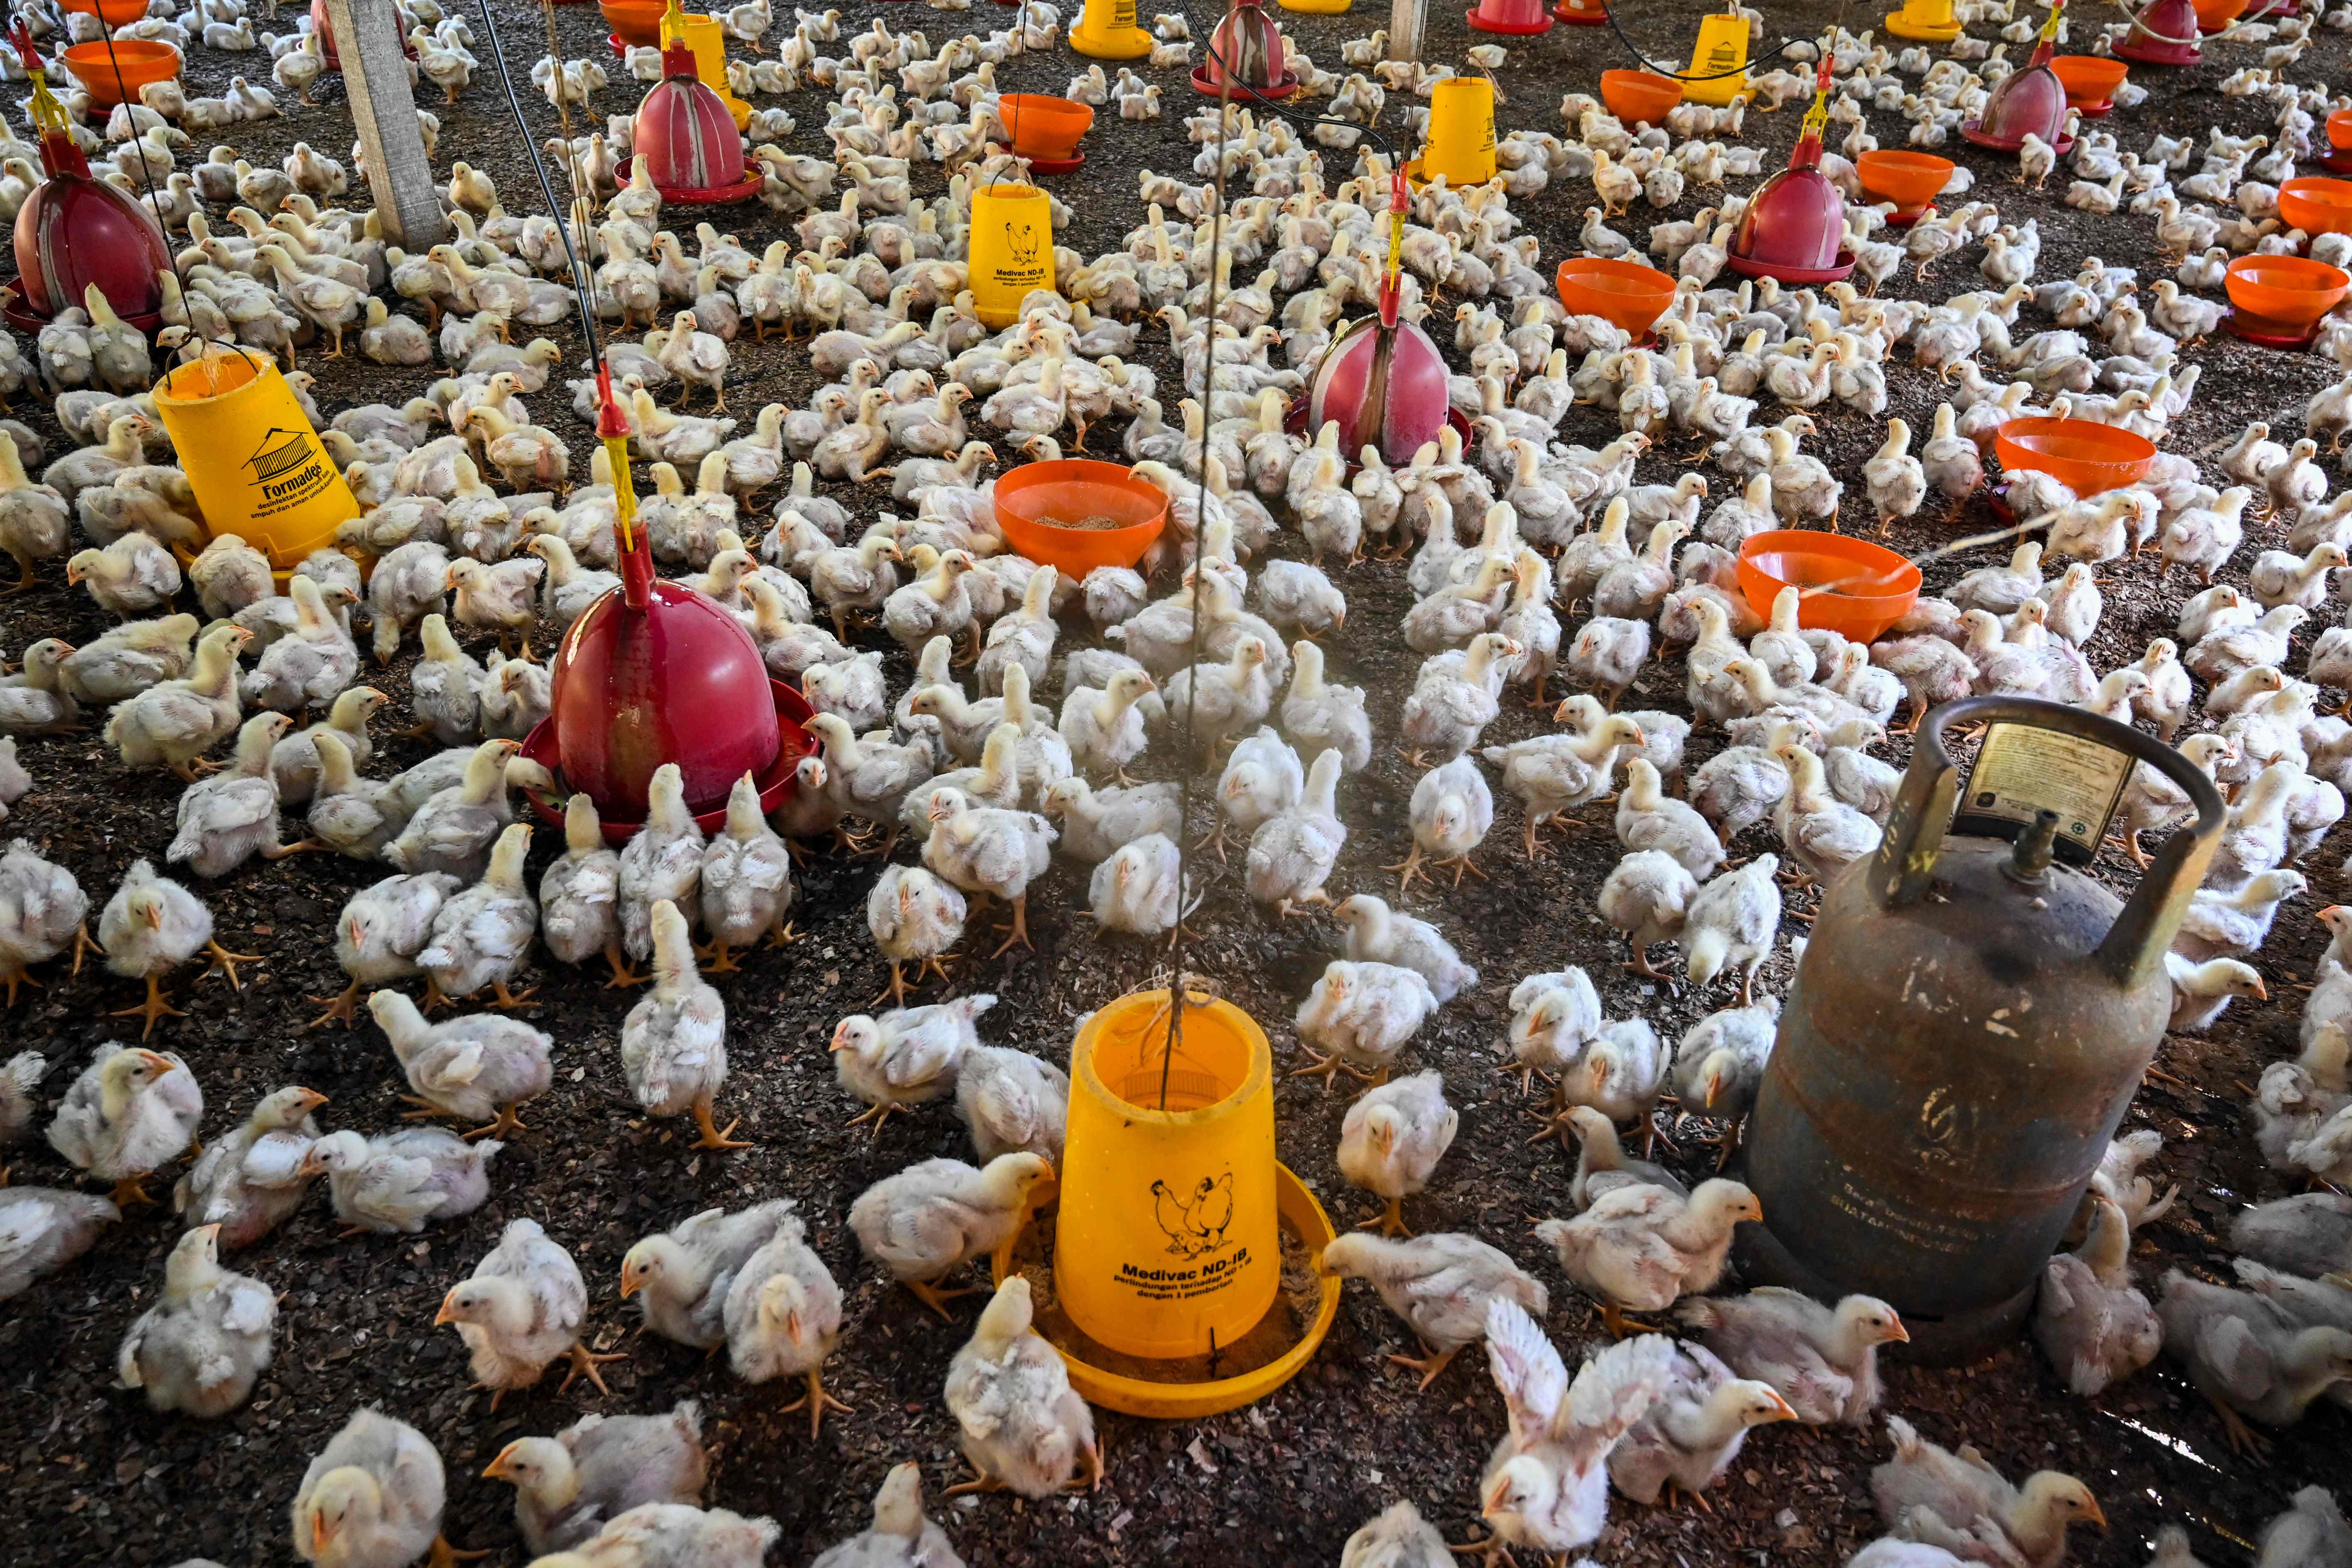 Chicks at a poultry farm during checks by government workers to examine the animals for signs of bird flu infection in Indonesia's Aceh province on 2 March this year